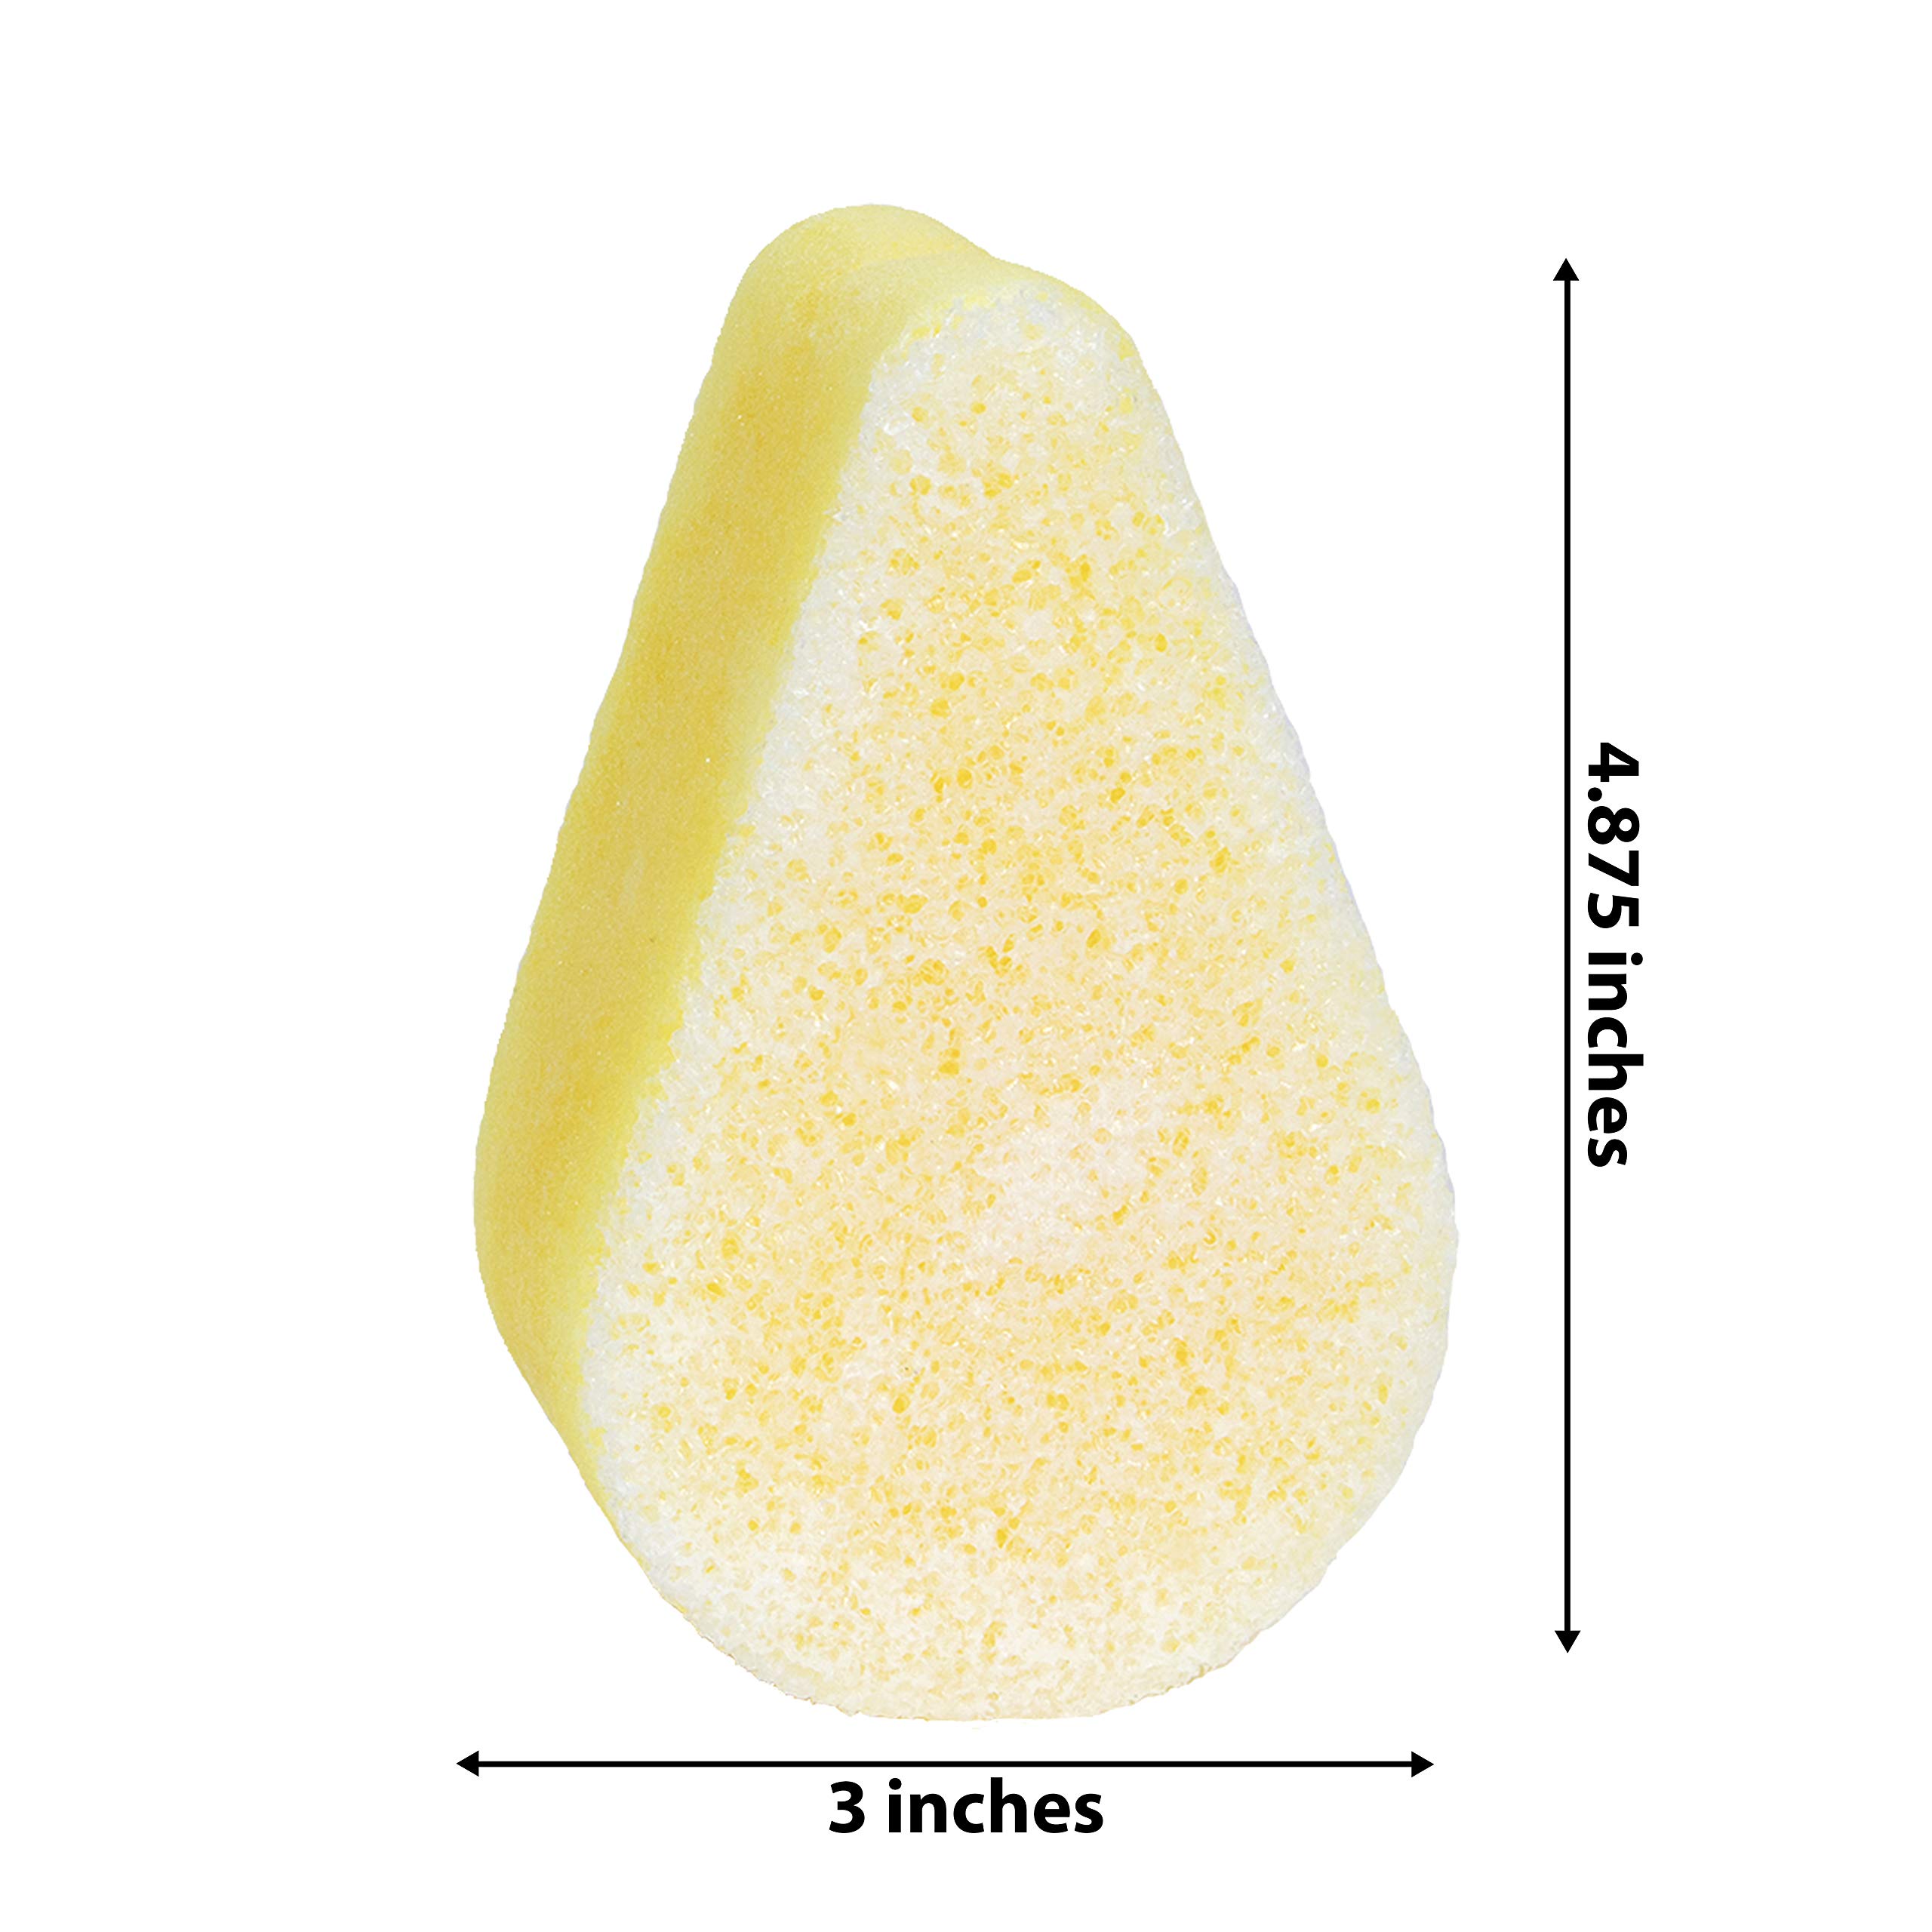 Spongeables Anti-Cellulite Body Wash in a Sponge With Vitamin C Reduce The appearance of Cellulite Moisturizer and Exfoliator for The Body 20+ Washes, Citrus